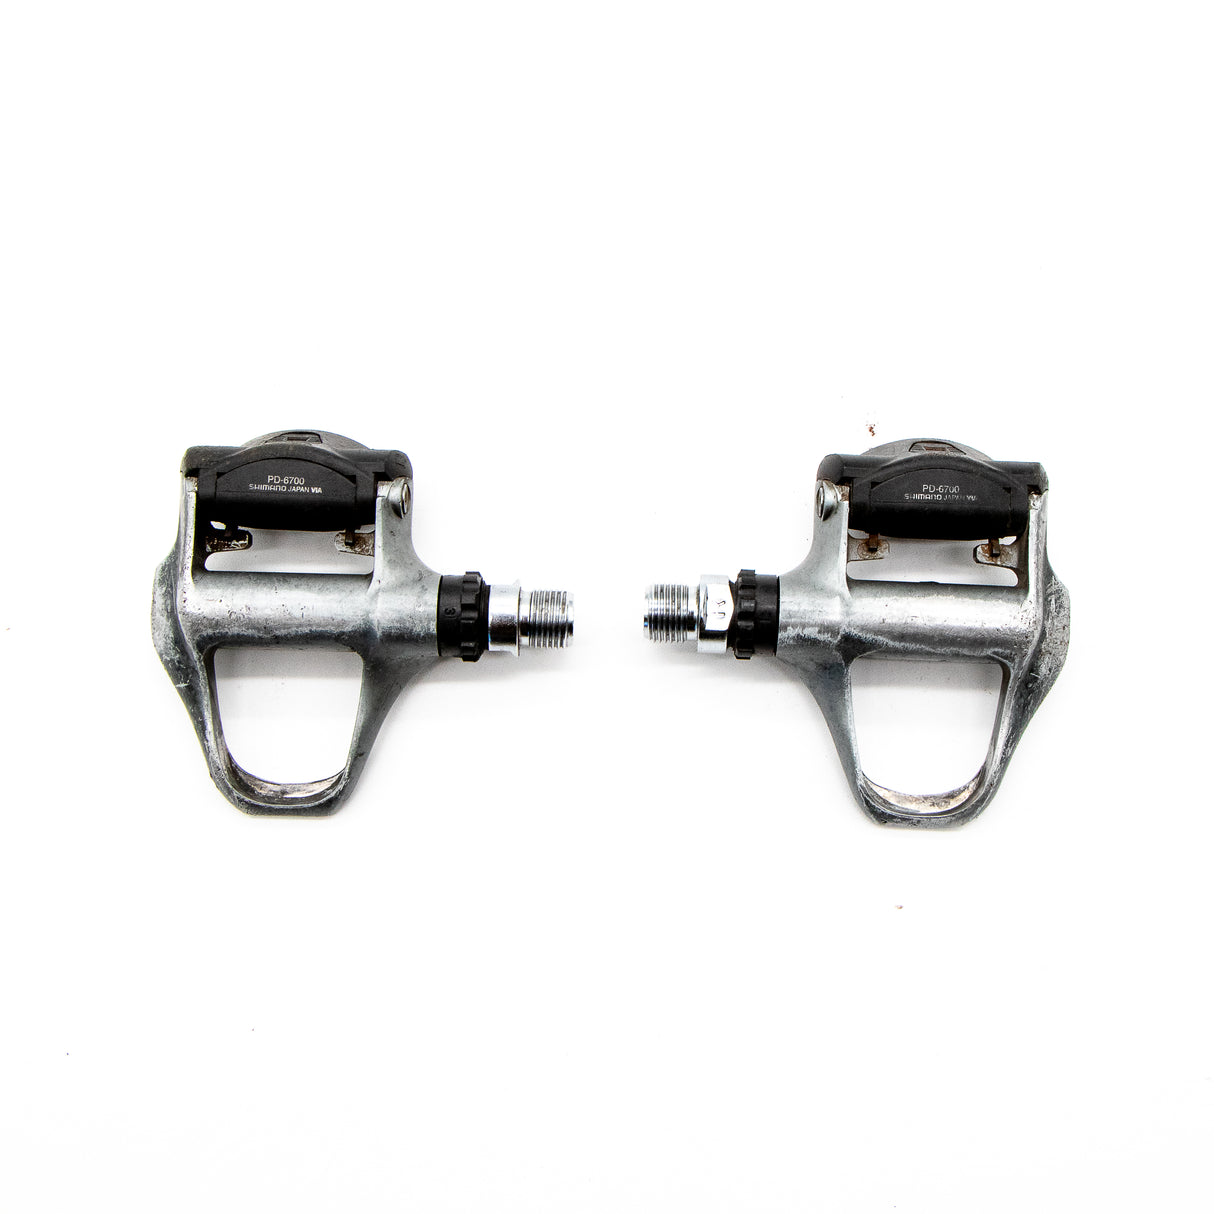 Shimano Dura Ace PD-6700 Clipless Road Pedals 317g